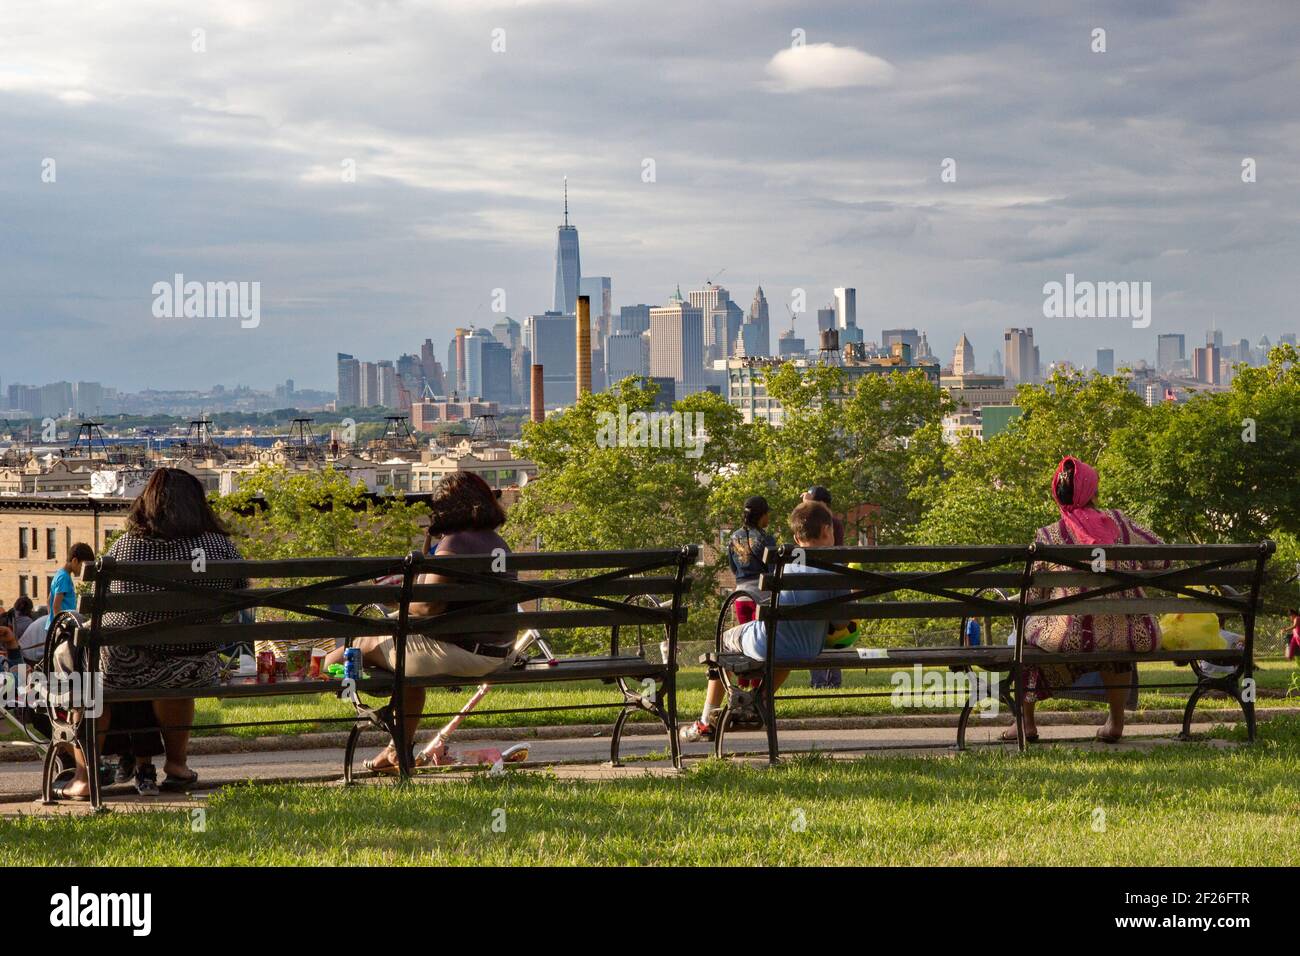 New York's diversity represented by people sat on a bench in Sunset Park, Brooklyn, admiring the view of Lower Manhattan on a sunny summer's day Stock Photo